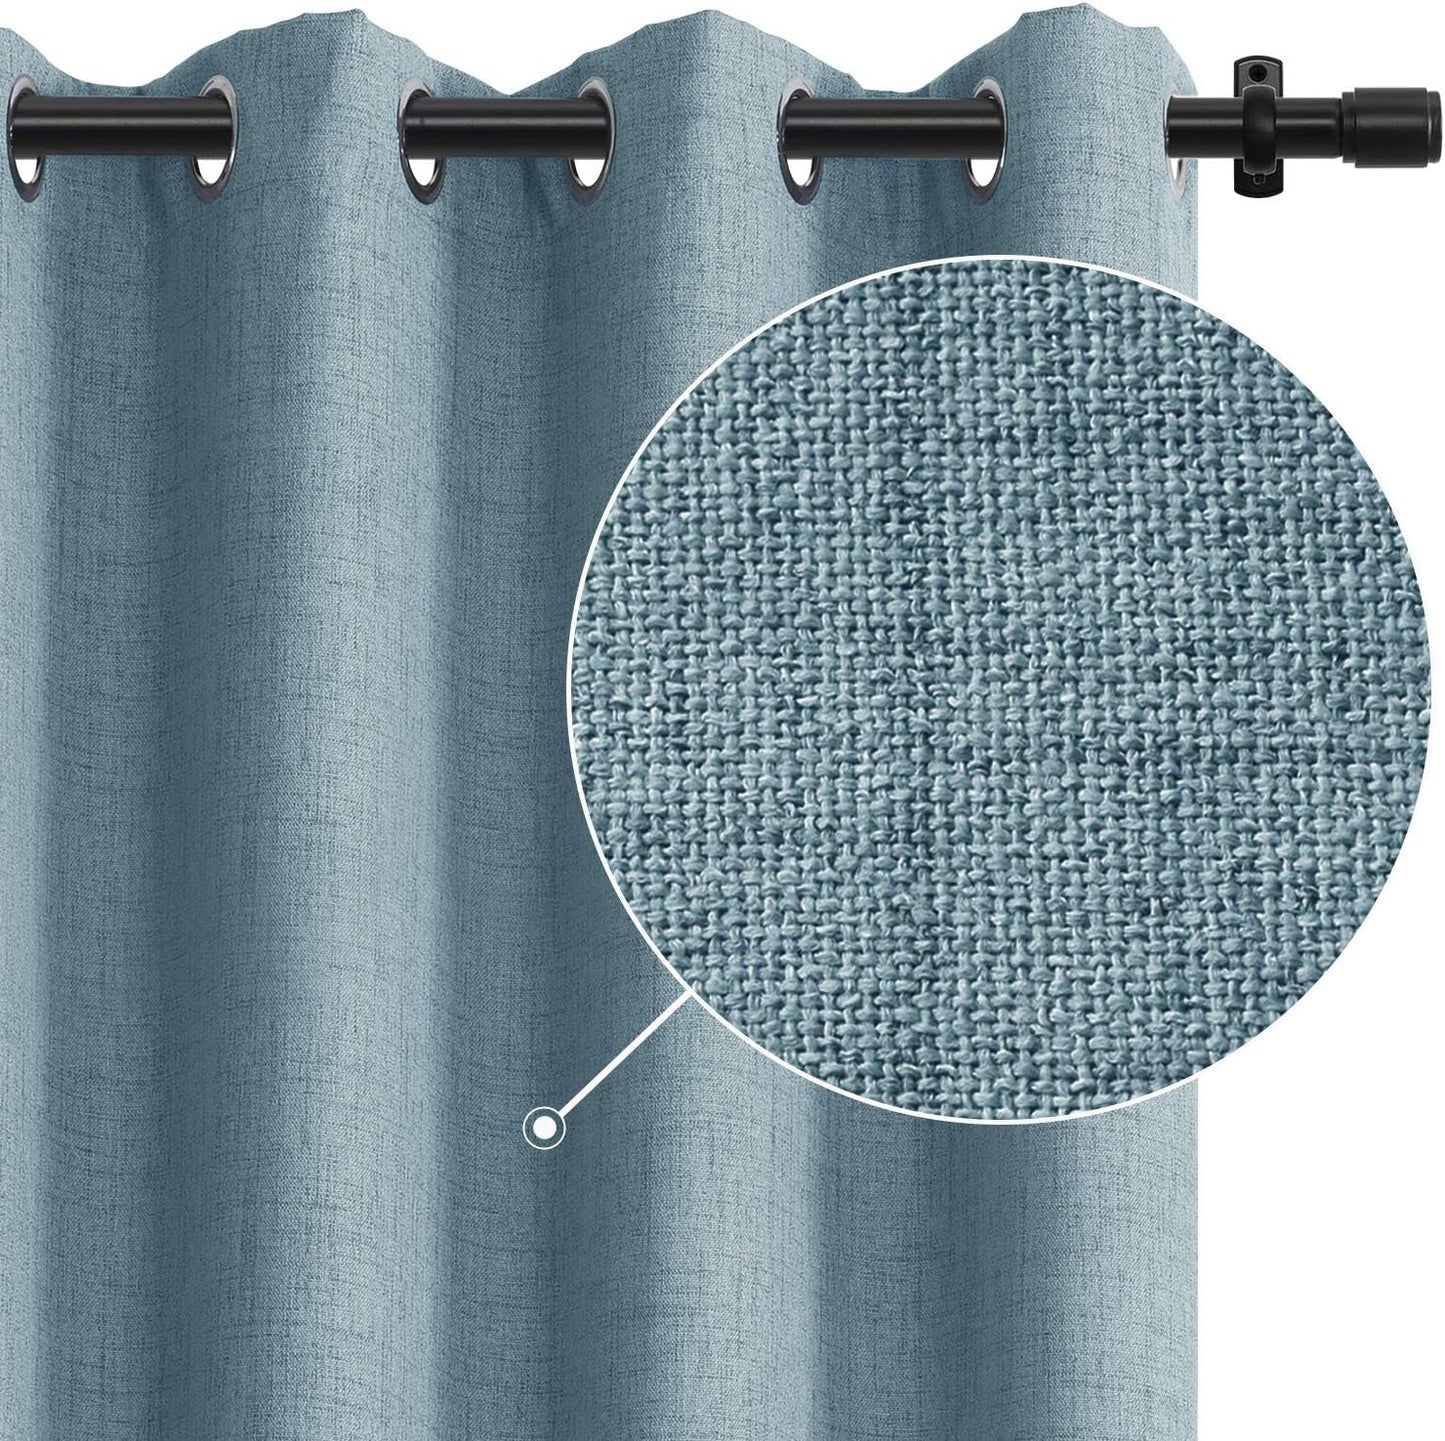 Rose Home Fashion Sliding Door Curtains, Primitive Linen Look 100% Blackout Curtains, Thermal Insulated Patio Door Curtains-1 Panel (W100 X L84, Grey)  Rose Home Fashion Blue W50 X L84|1 Panel 